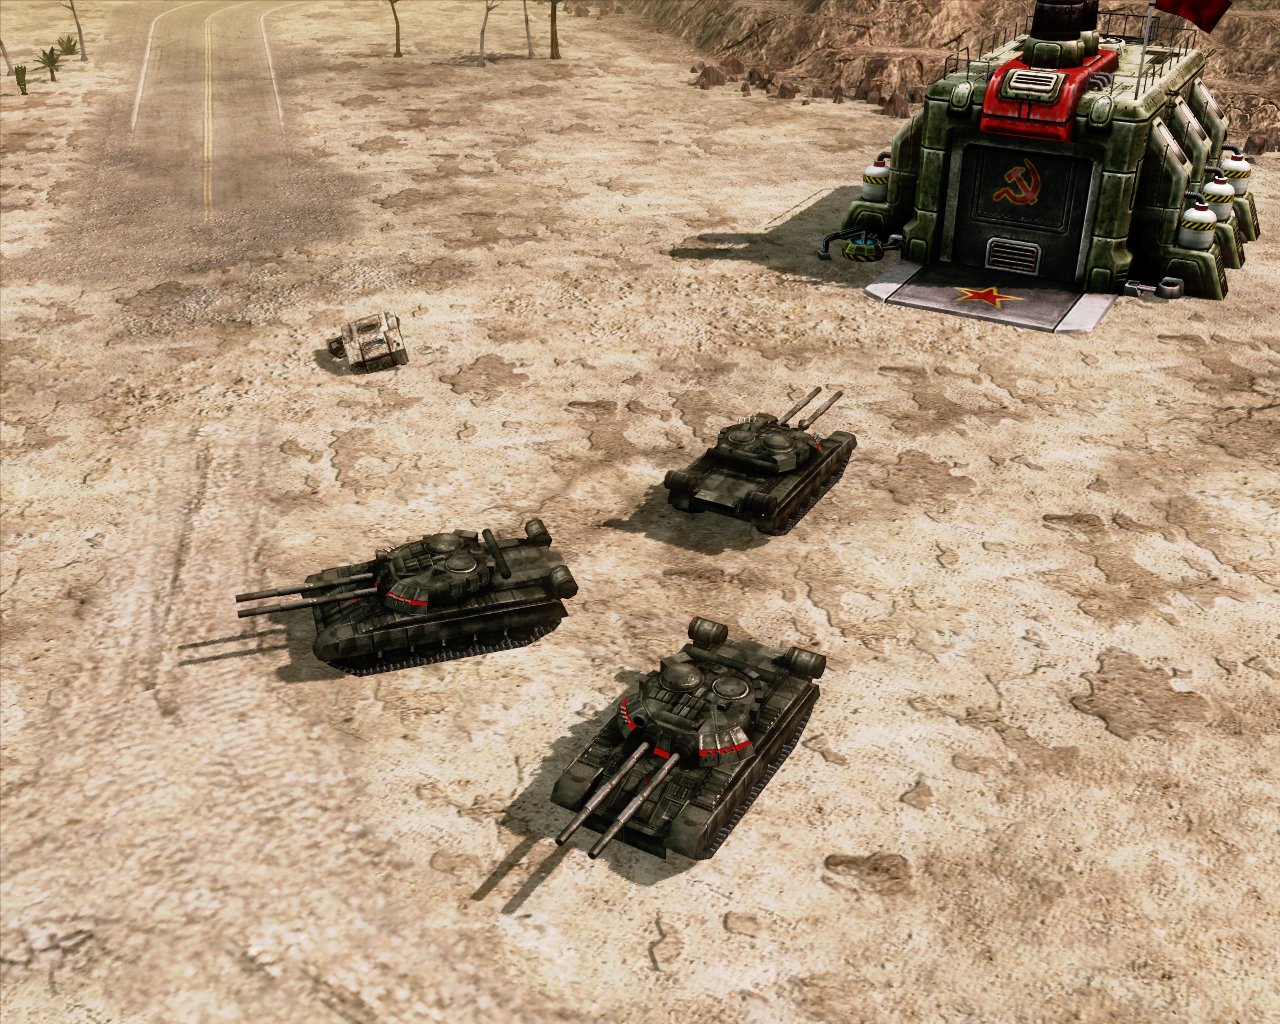 ModDB on Twitter: "Get ready to tank rush with Command &amp; Conquer: Red Alert History, the mod which some Red units the Command &amp; Conquer 3: Tiberium Wars engine,